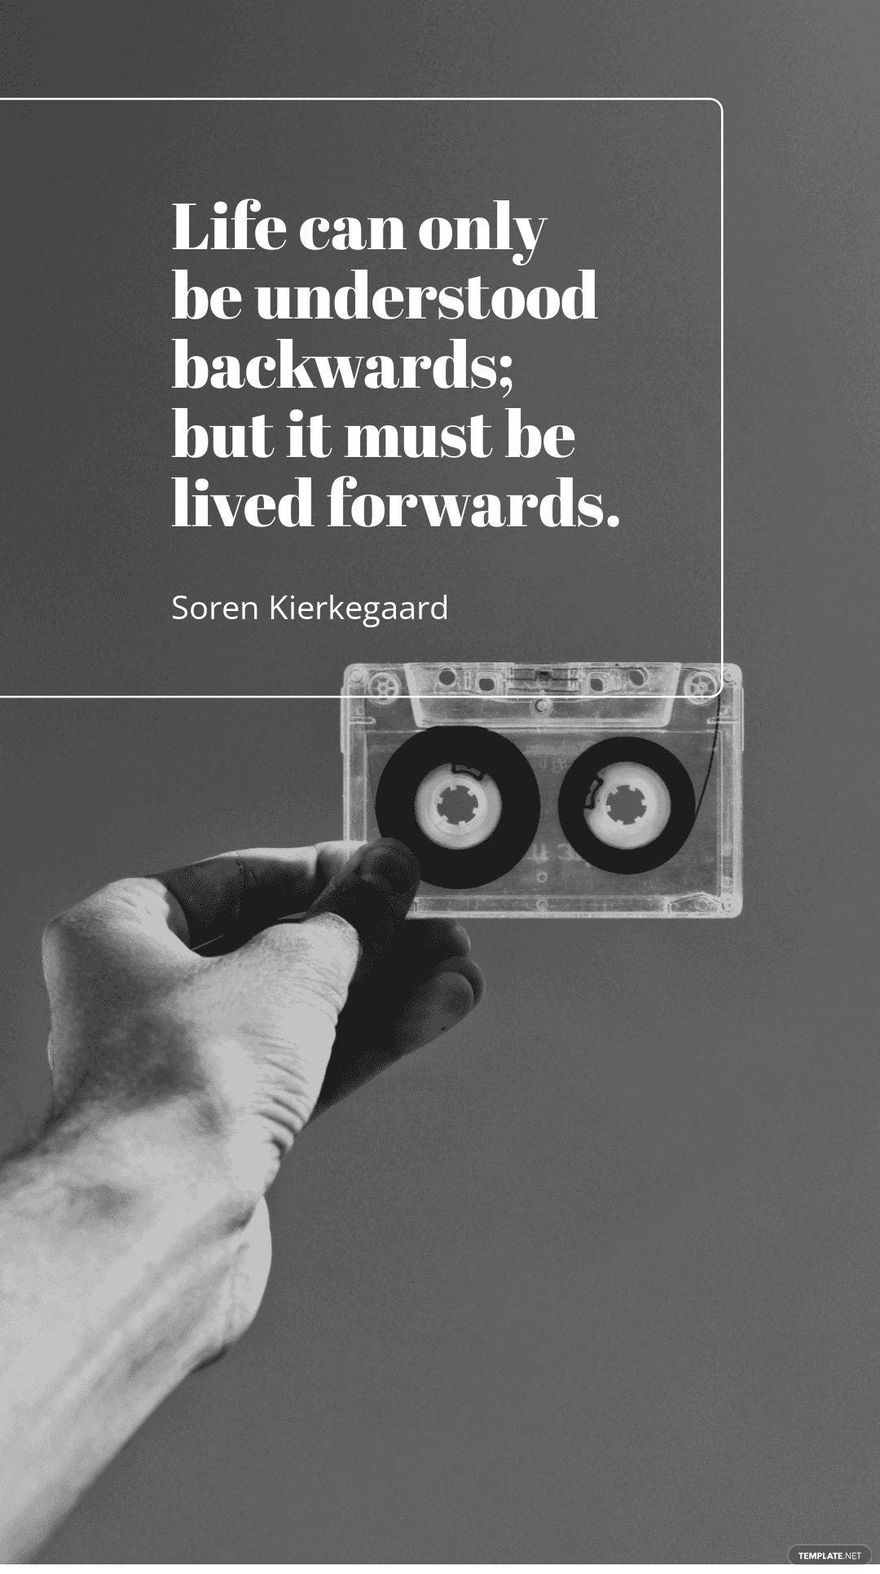 Soren Kierkegaard - Life can only be understood backwards; but it must be lived forwards.